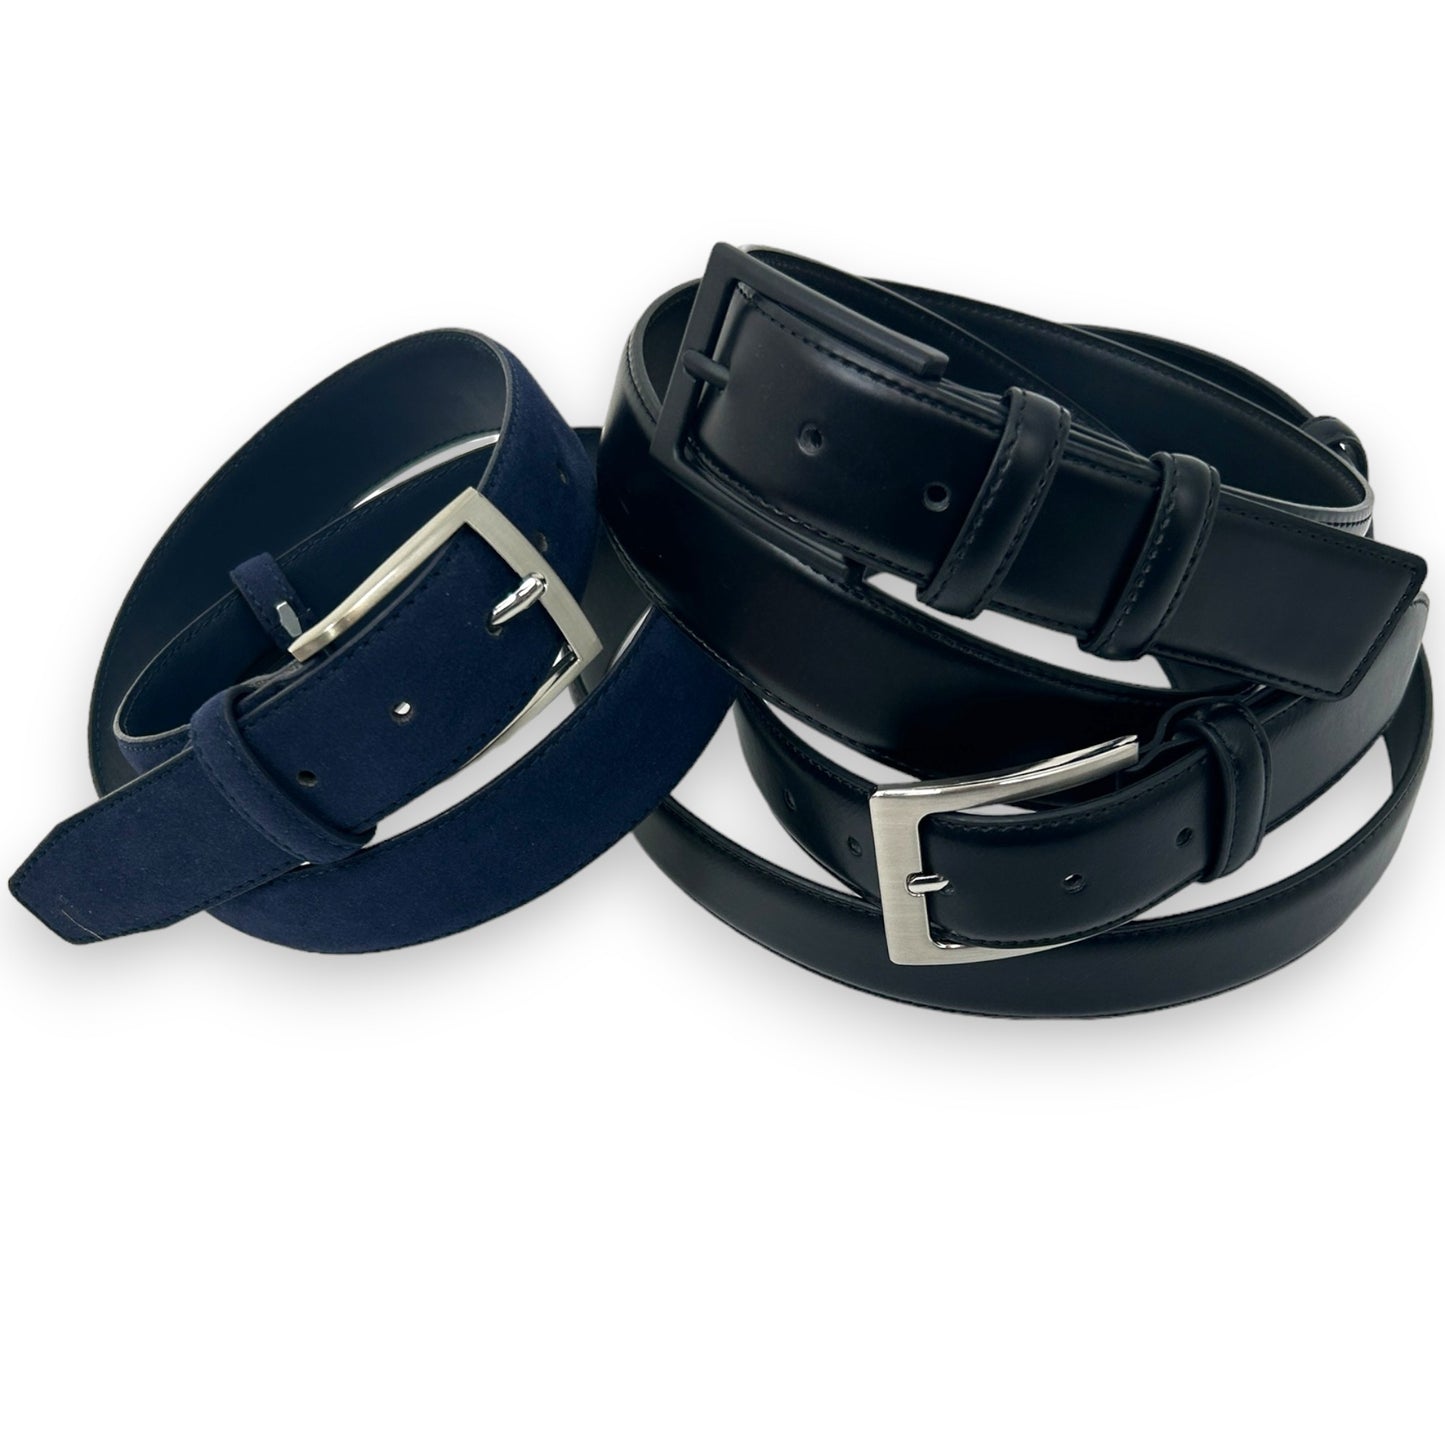 Safekeepers belts - belt suede - 2 pieces